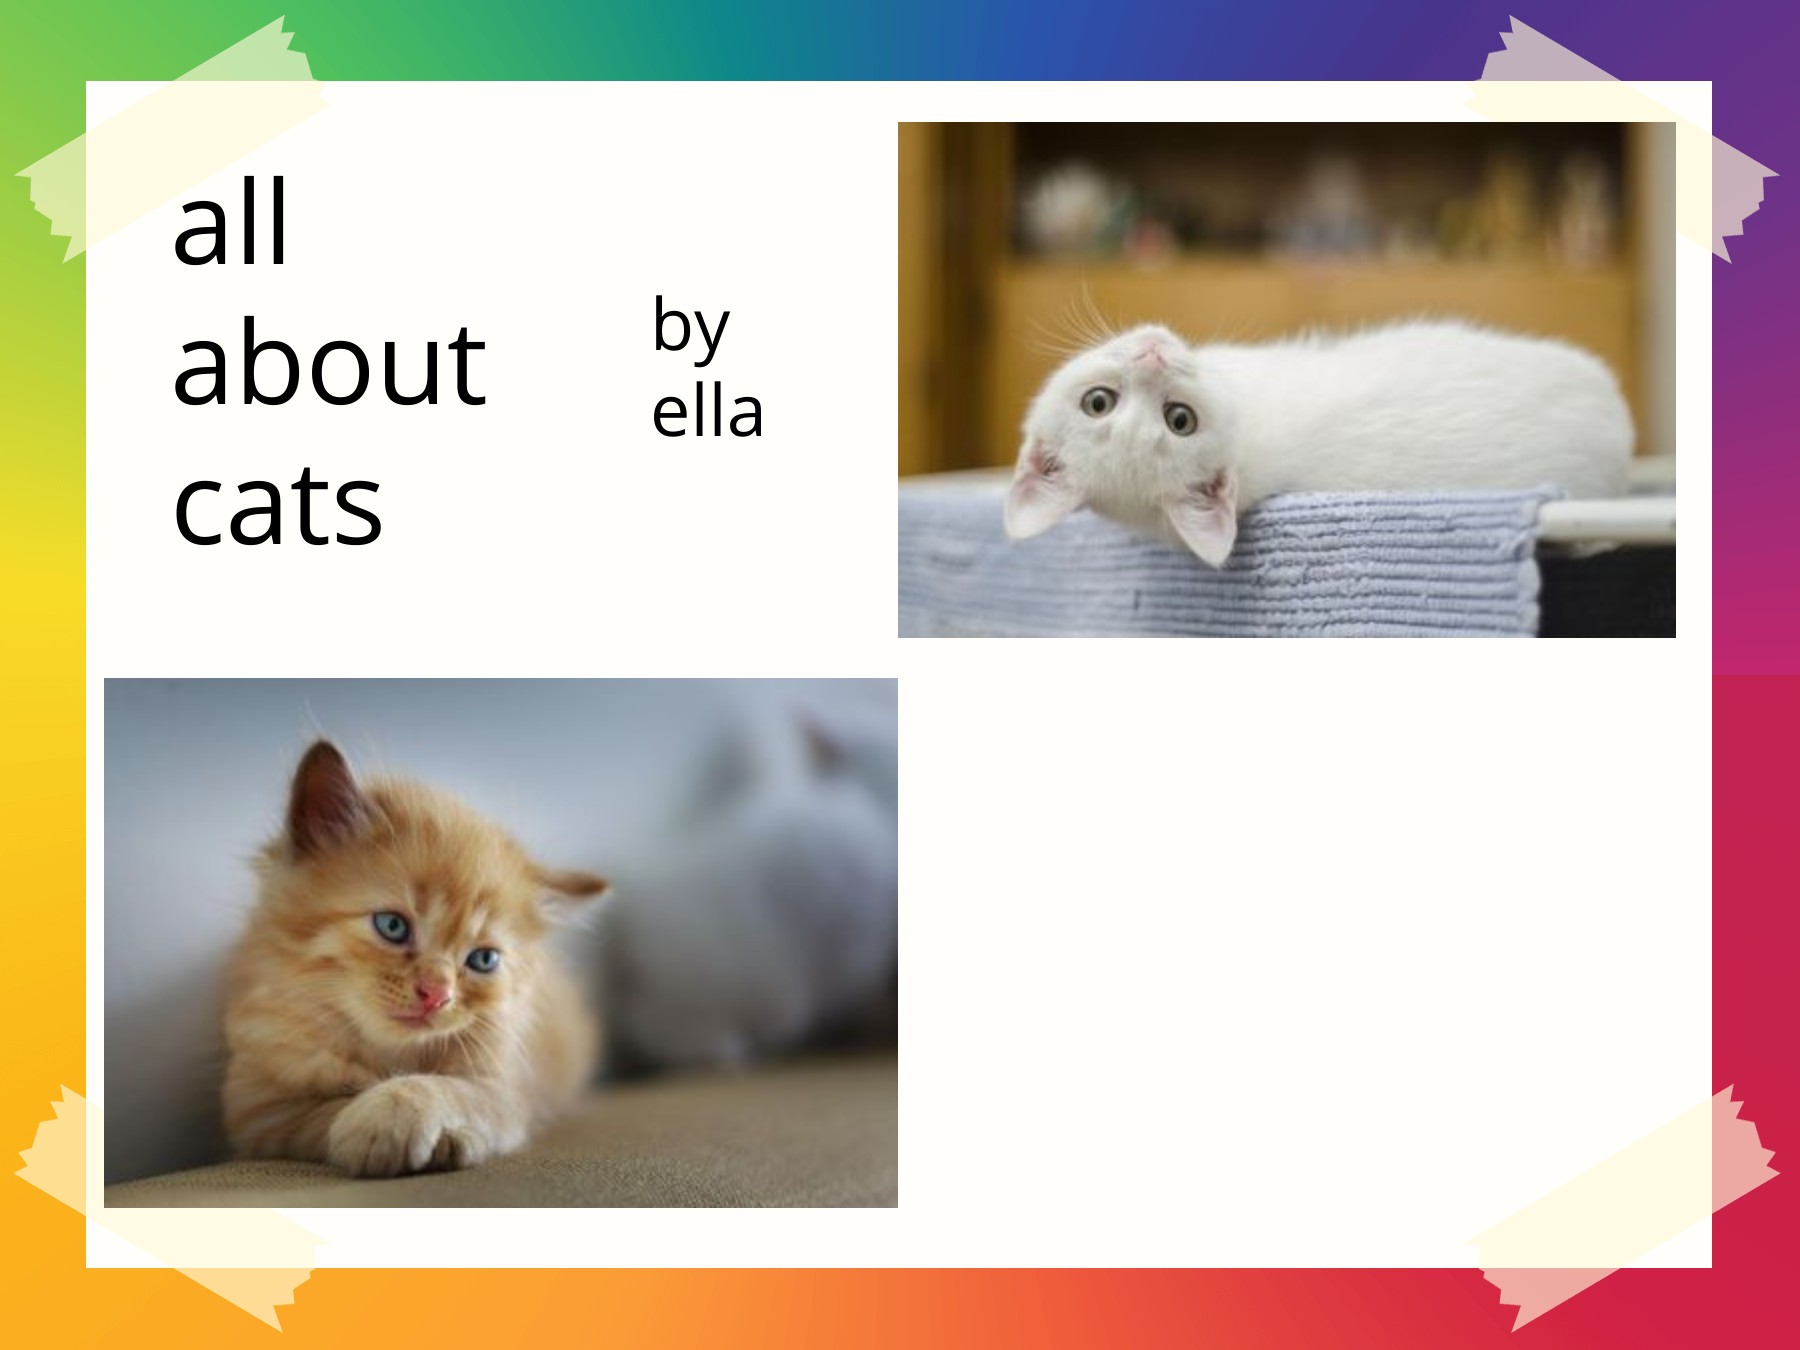 Book Creator - All about cats